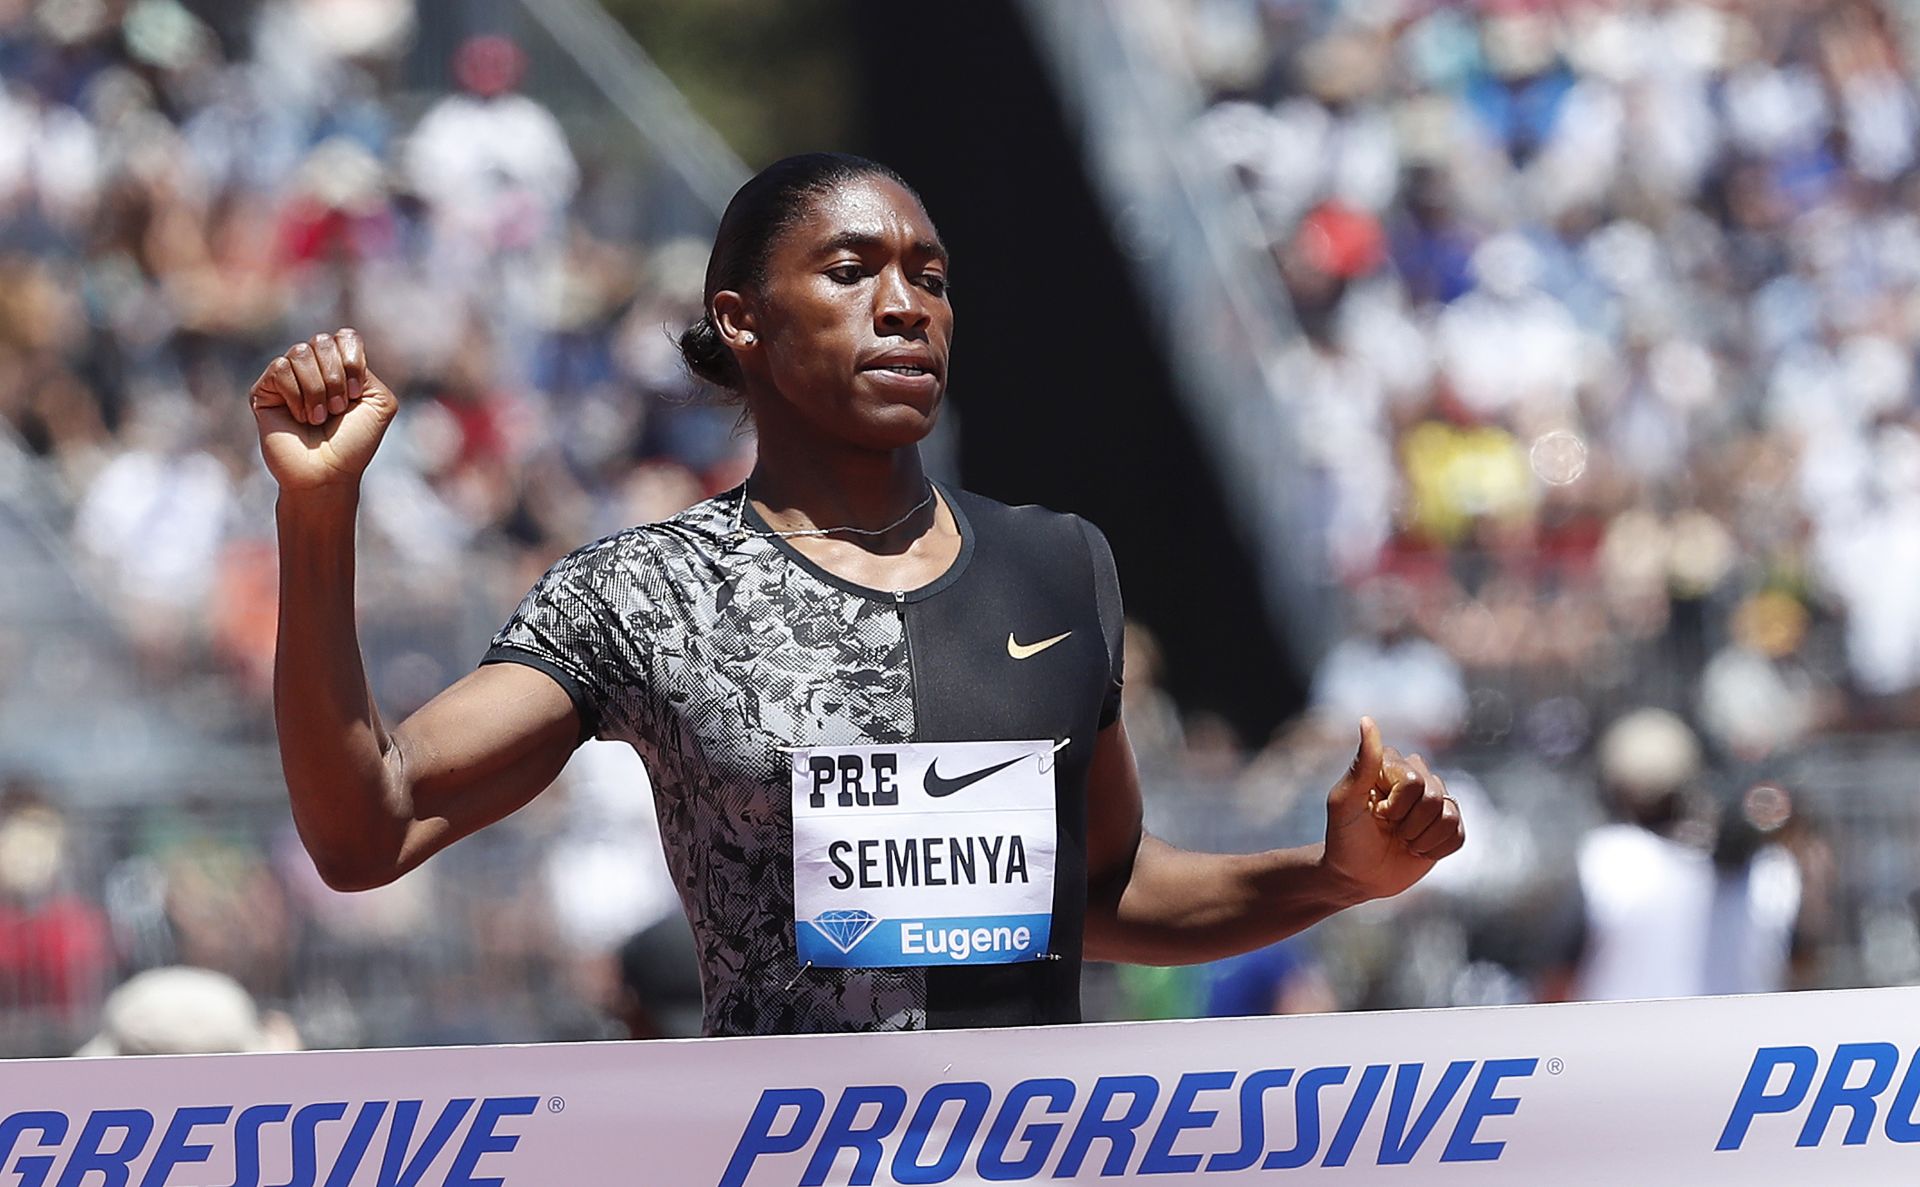 epa07686234 Caster Semenya of South Africa crosses the finish to win the Women 800m during the Athletics IAAF Diamond League  - Prefontaine Classic at Stanford, California, USA, 30 June 2019.  EPA/JOHN G. MABANGLO